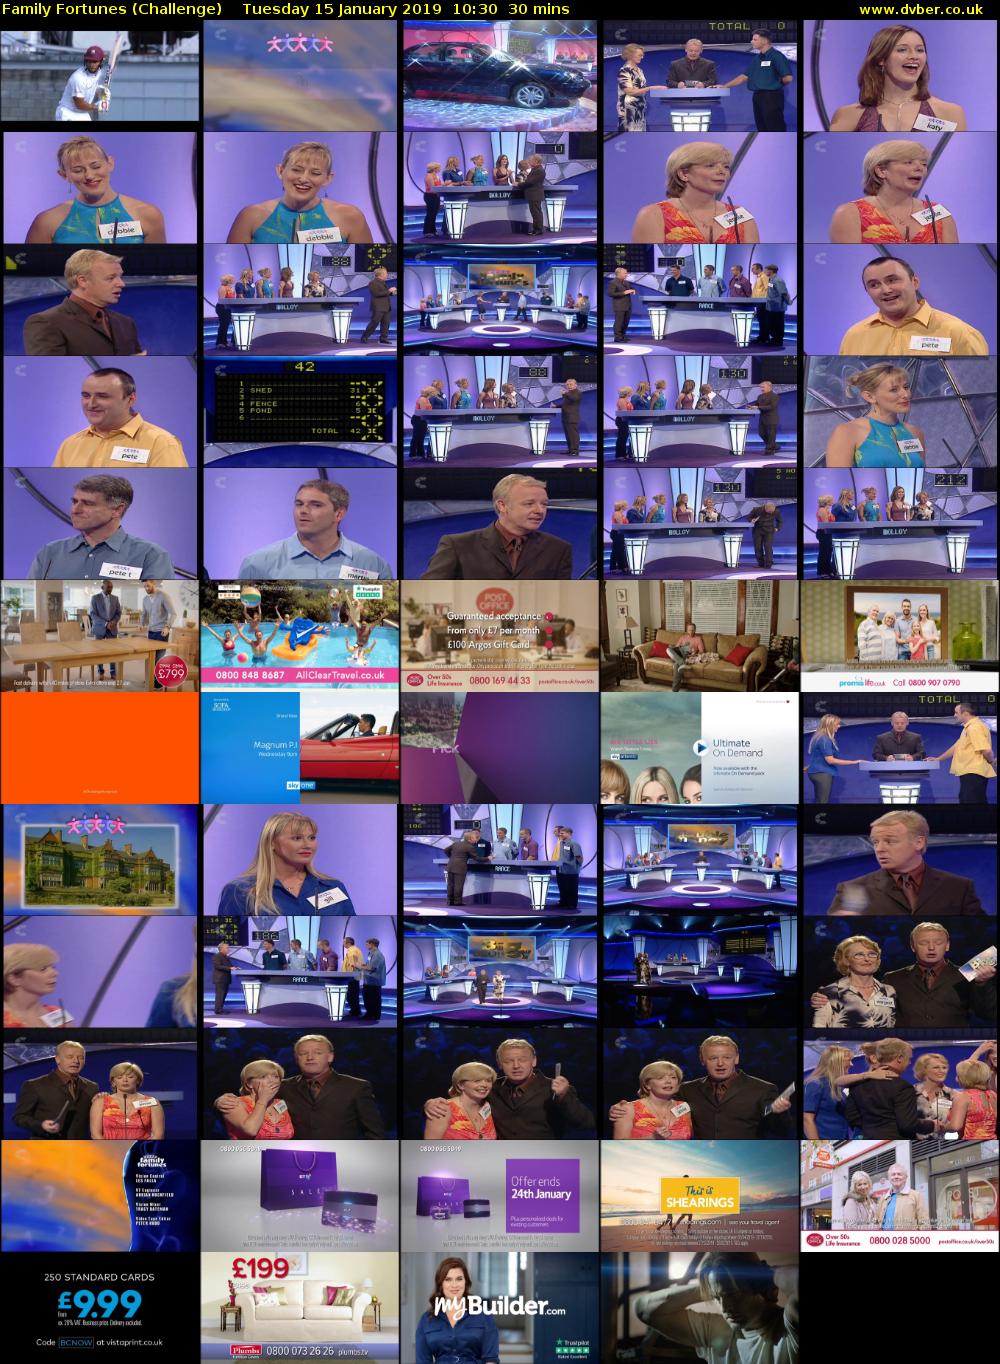 Family Fortunes (Challenge) Tuesday 15 January 2019 10:30 - 11:00